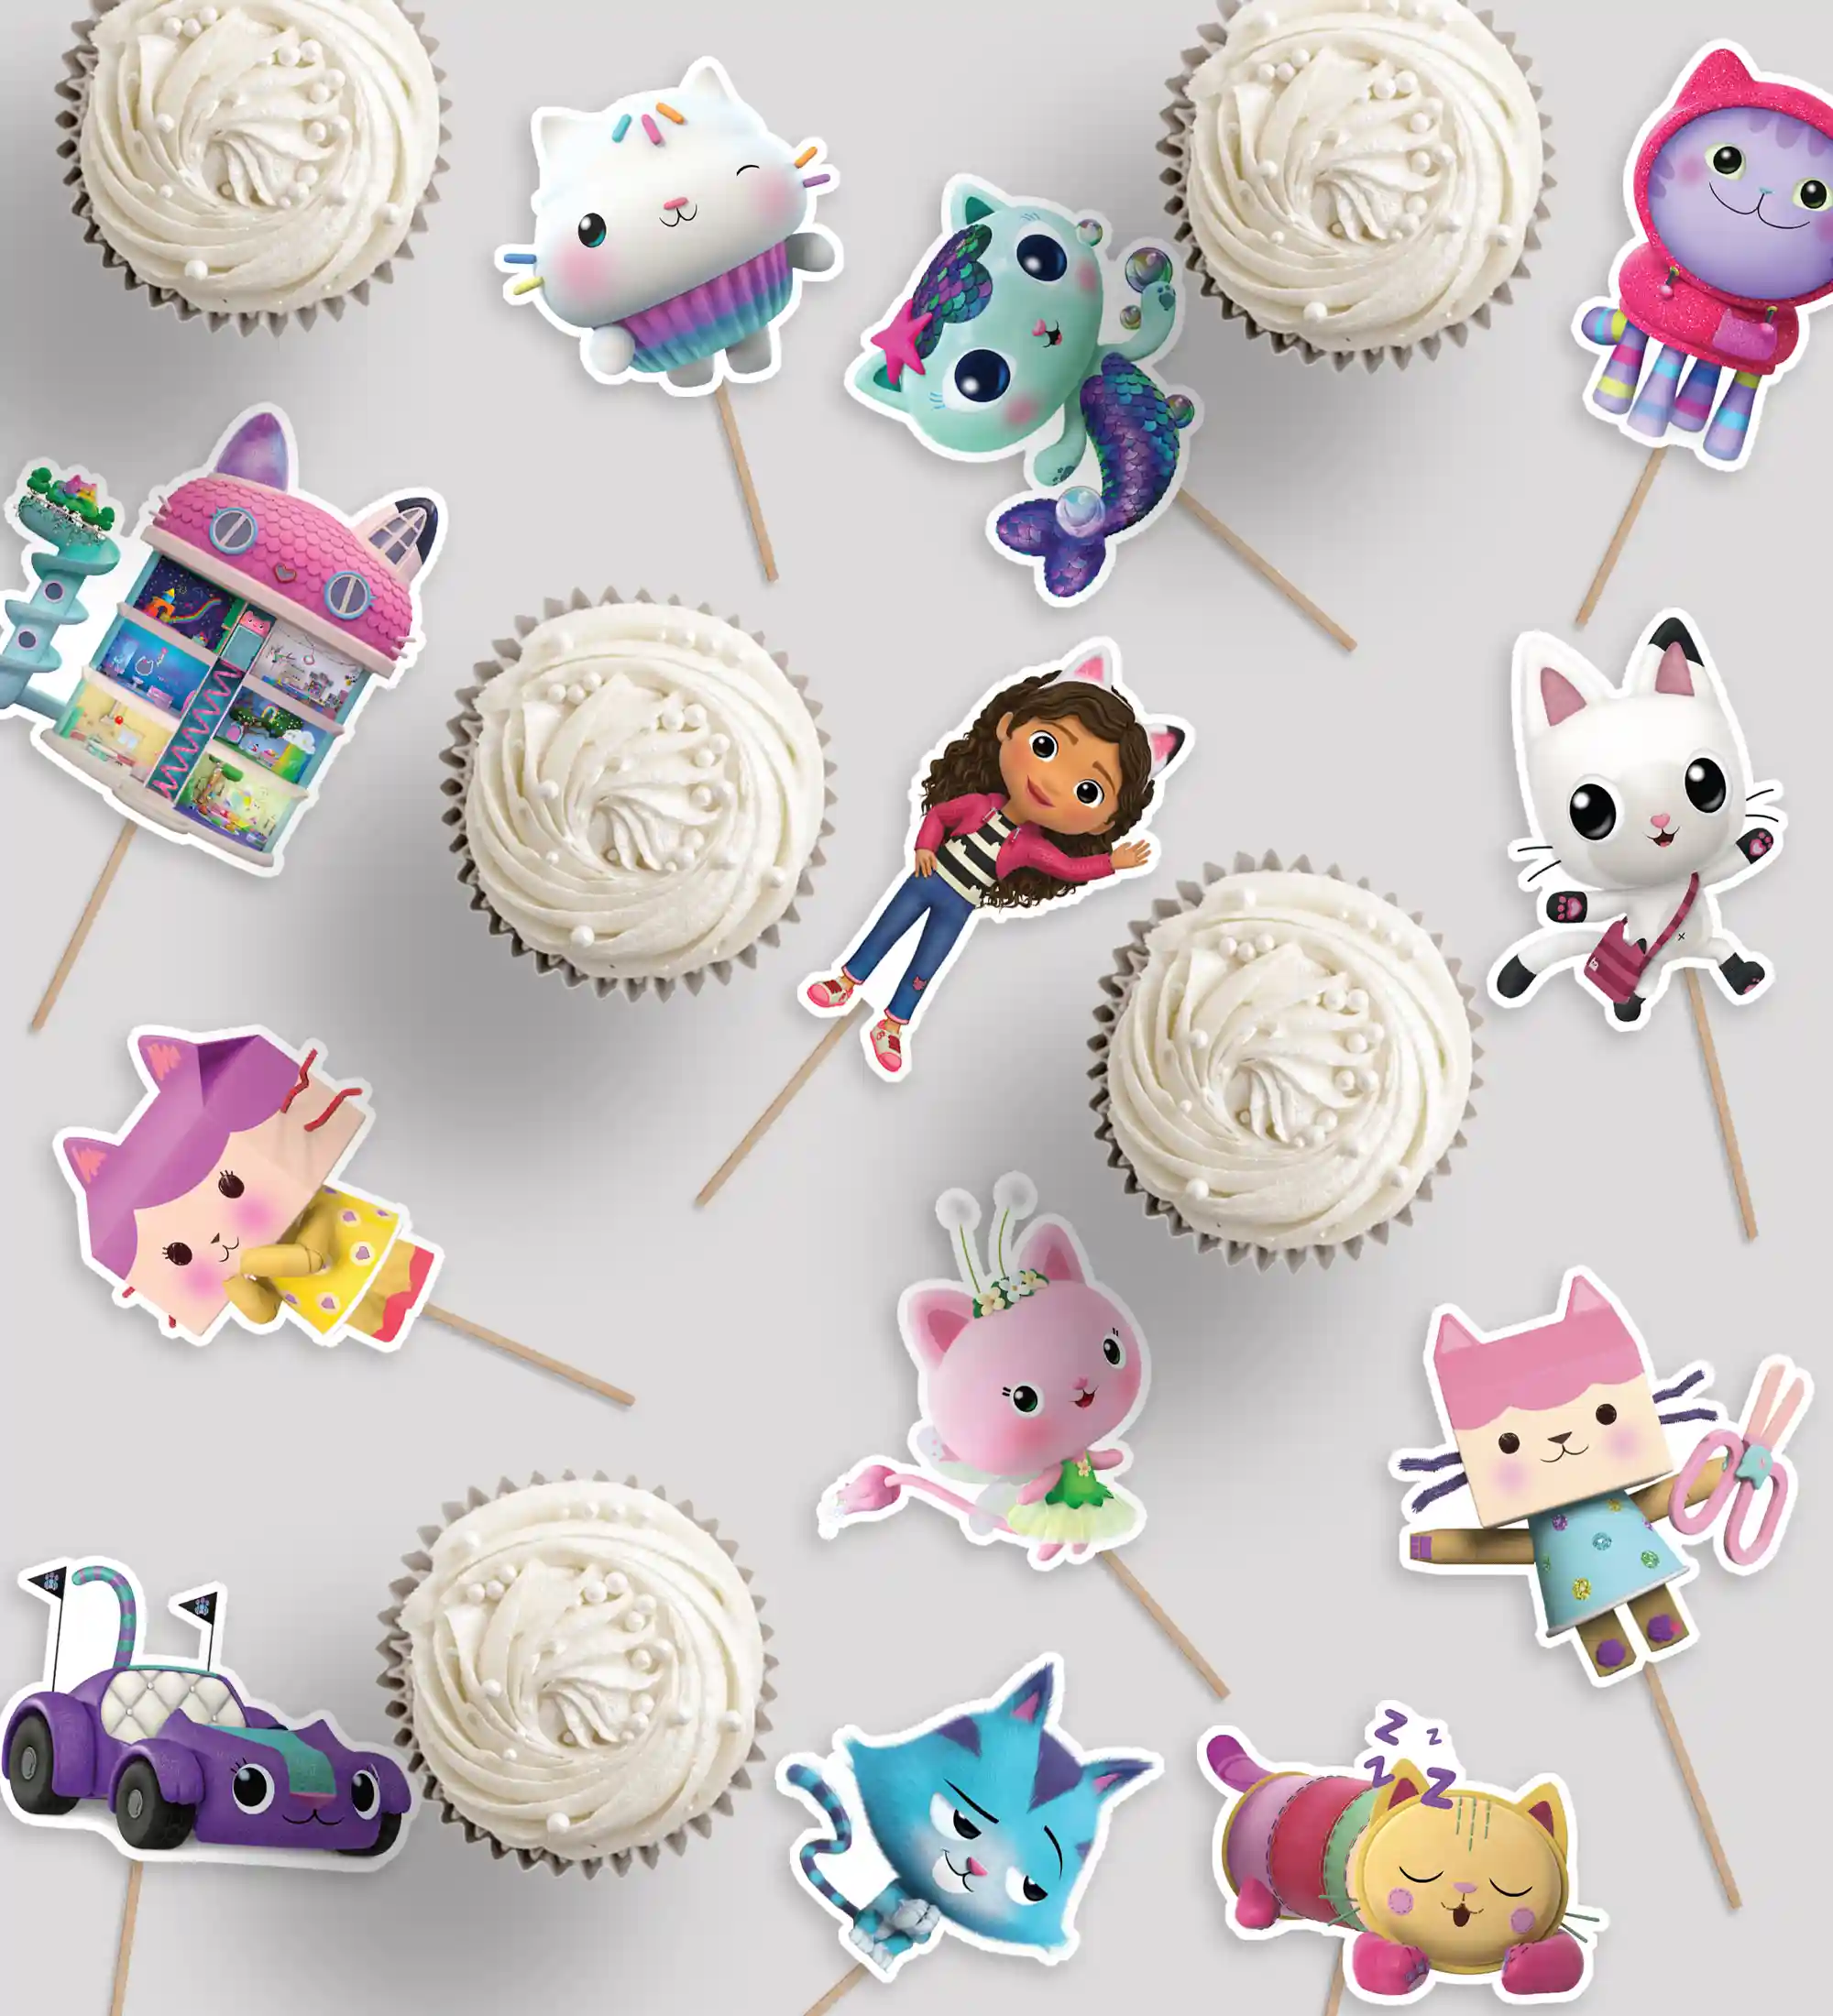 Decorate for your Gabby's Dollhouse party with printable Gabby themed prints. Includes Gabby's Dollhouse thank you tags, welcome sign, cupcake toppers, cake topper, happy birthday banner, Gabby stickers and tags, birthday garland, character cutouts for large decor, games, activities, and coloring pages.